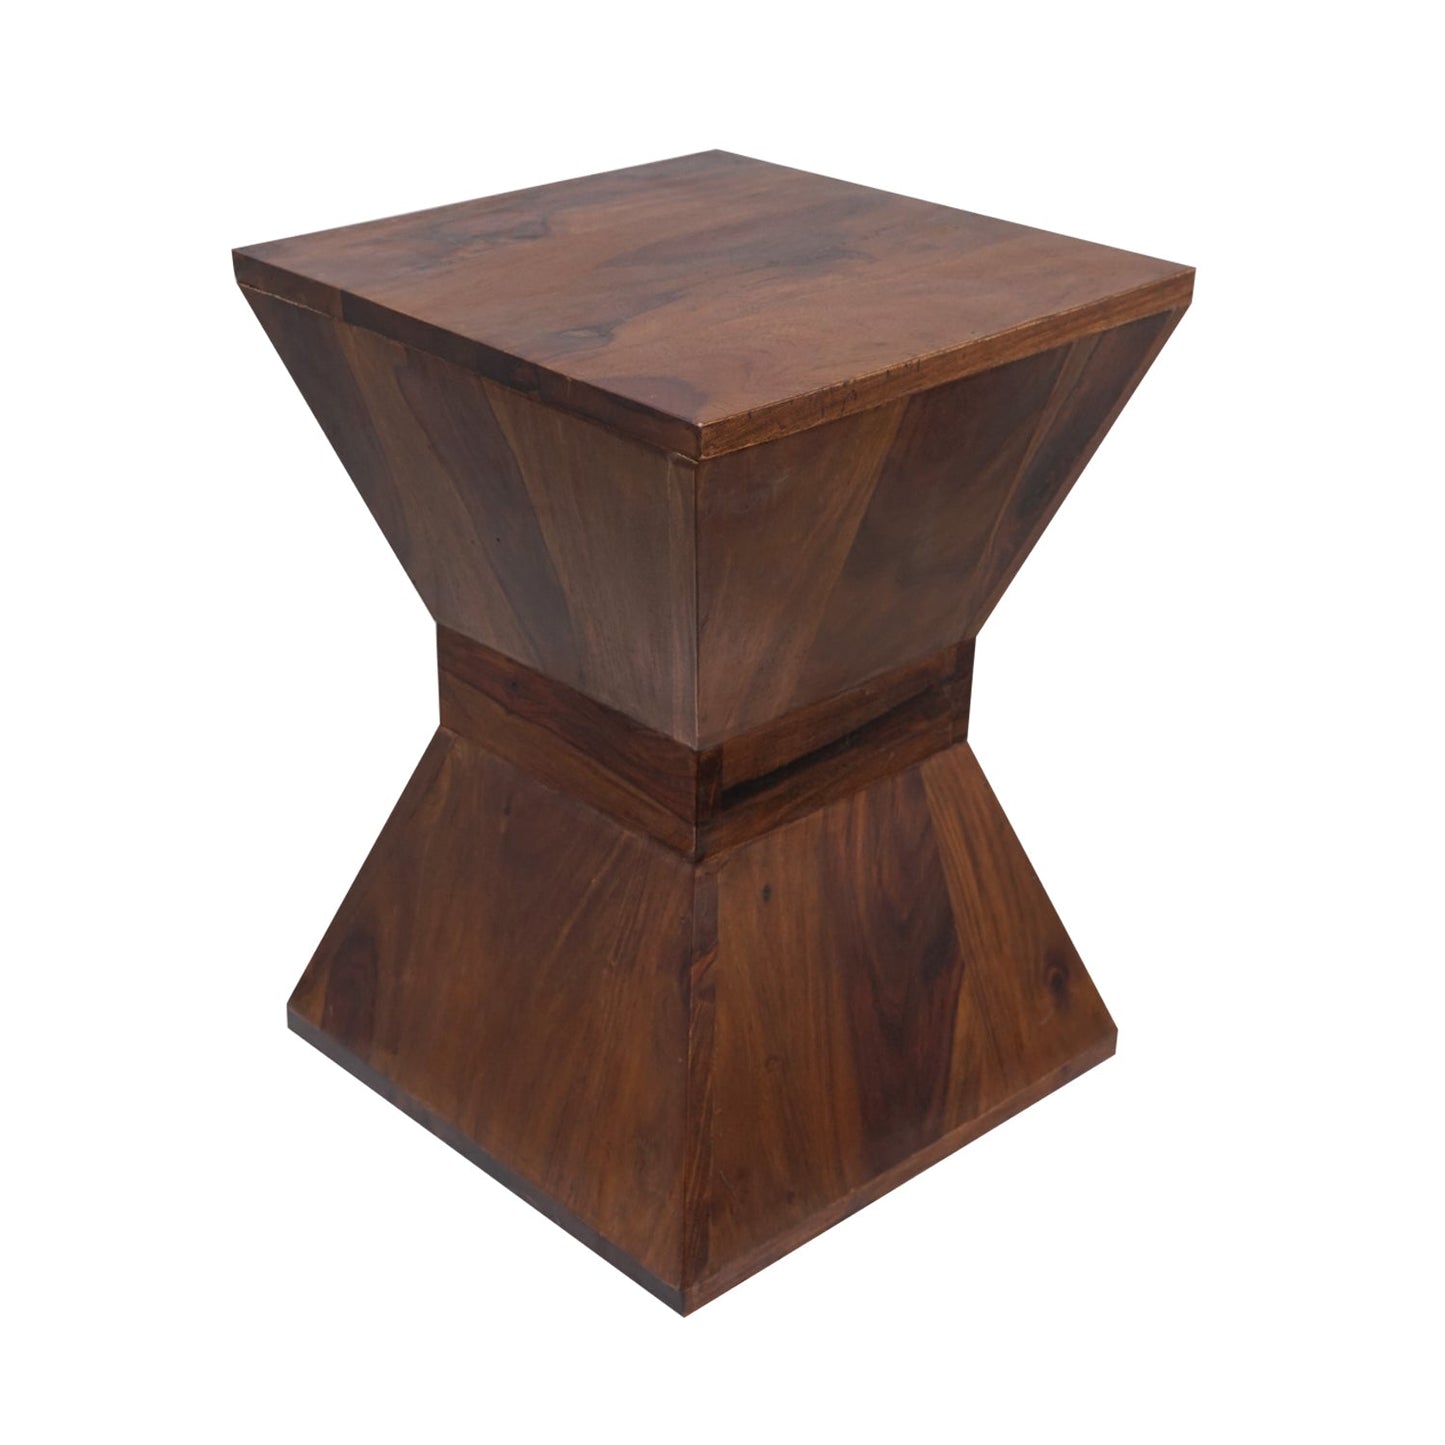 Wooden Pyramid Stools and Coffee Table Set - Stylla London